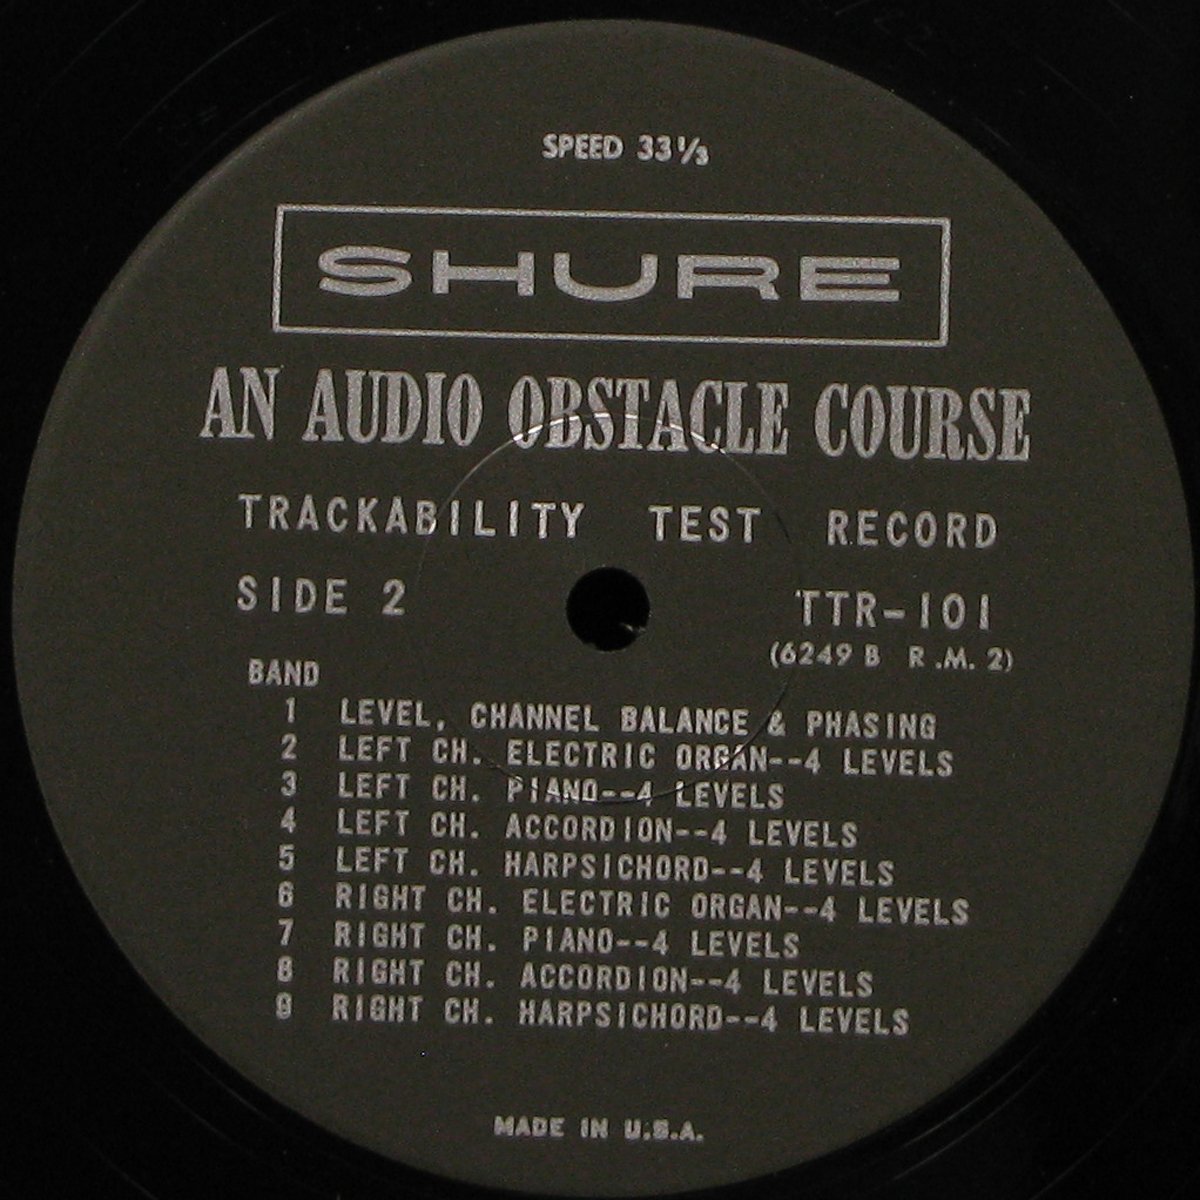 Тестовая Пластинка An Audio Obstacle Course (The Shure Trackability Test Record) фото 5